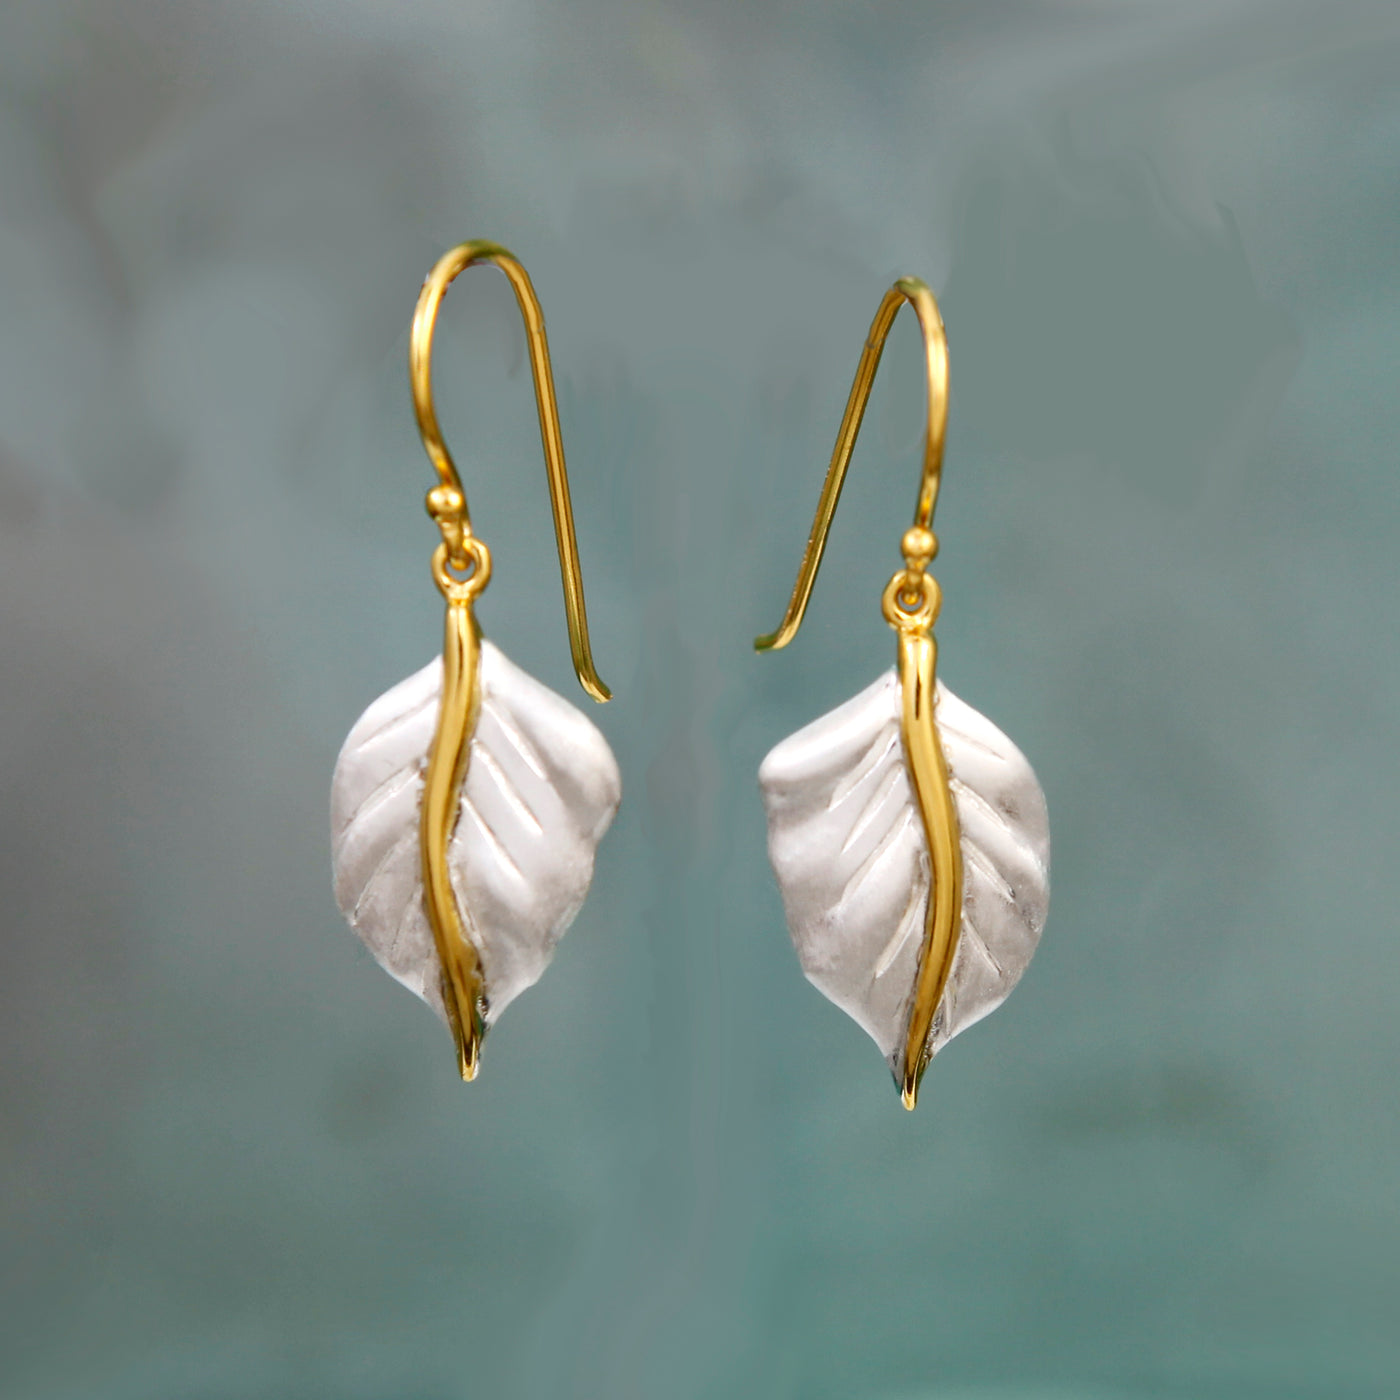 Image of SIlver Leaf Drop Earrings with Gold Details